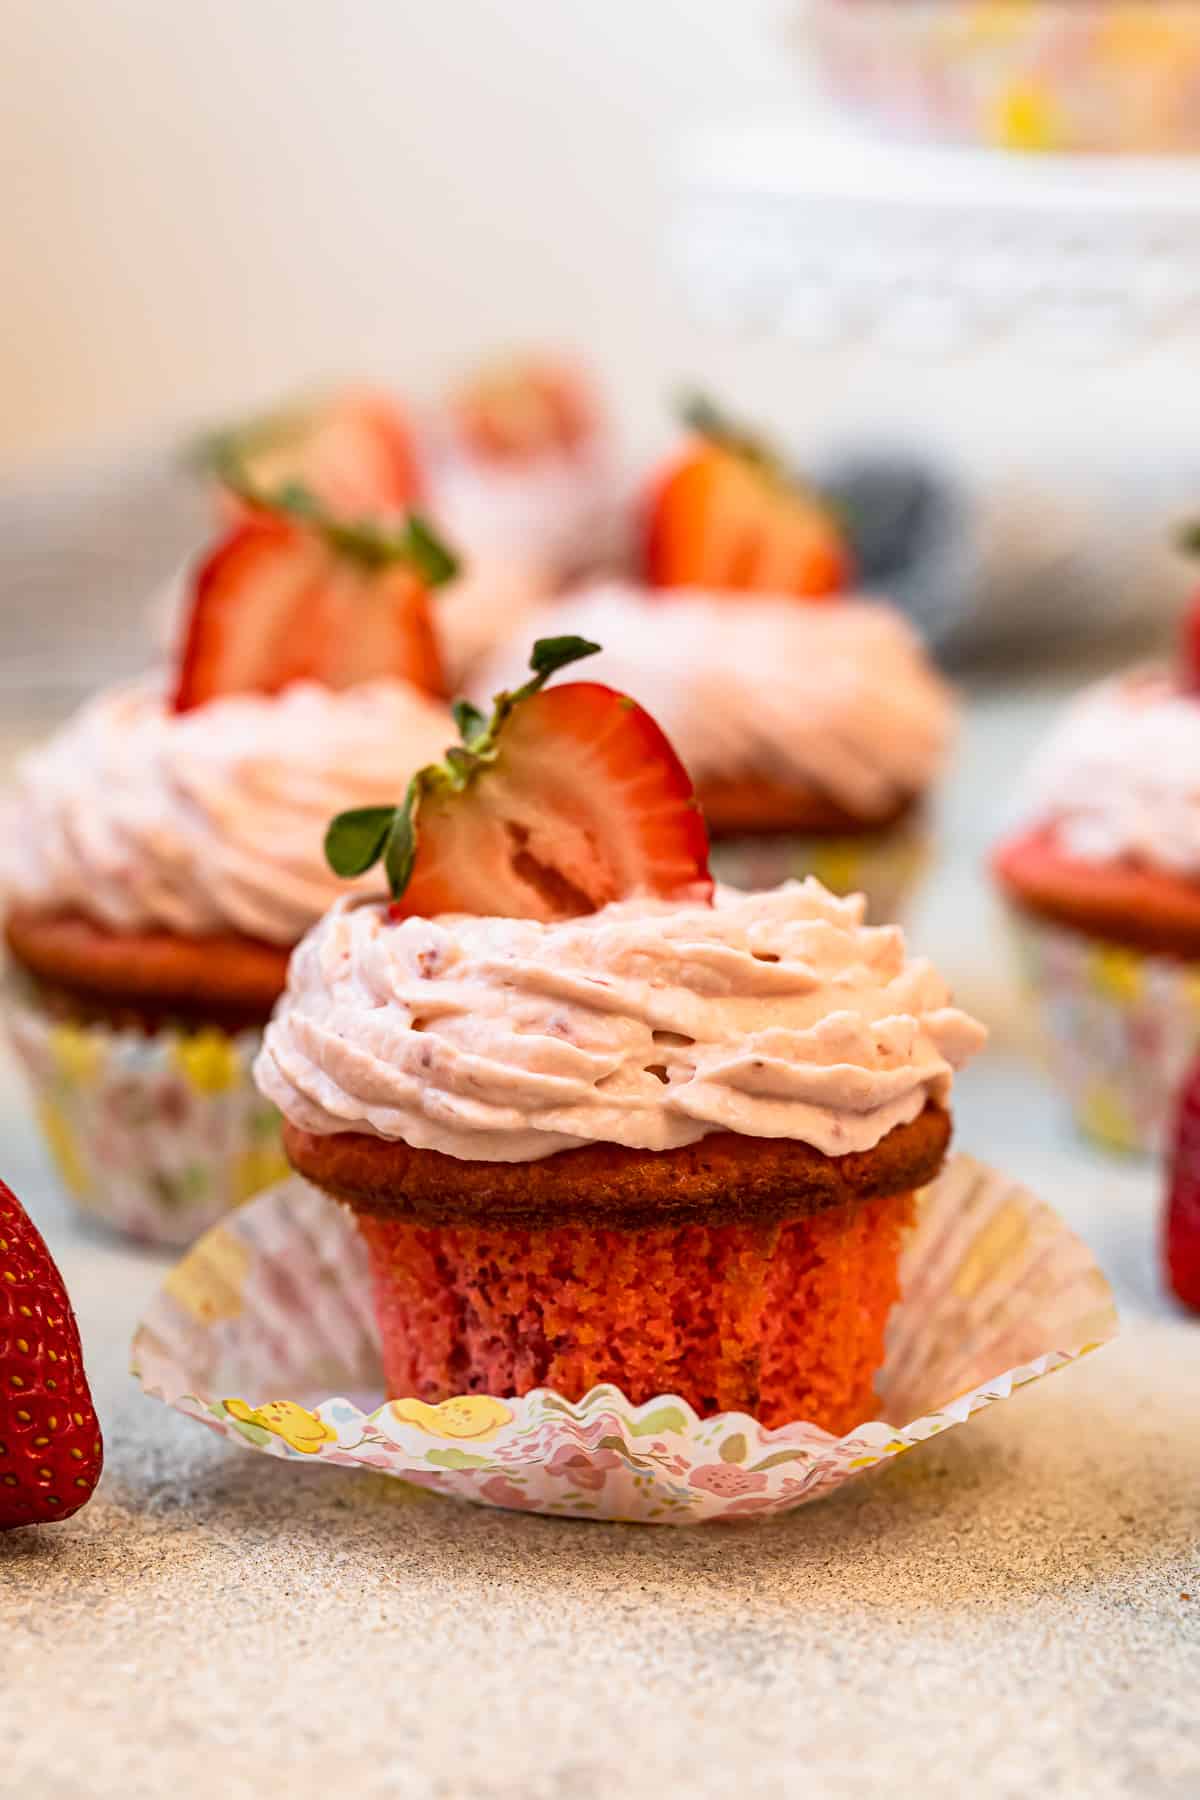 unwrapped strawberry cupcake on a colorful cupcake wrapper.